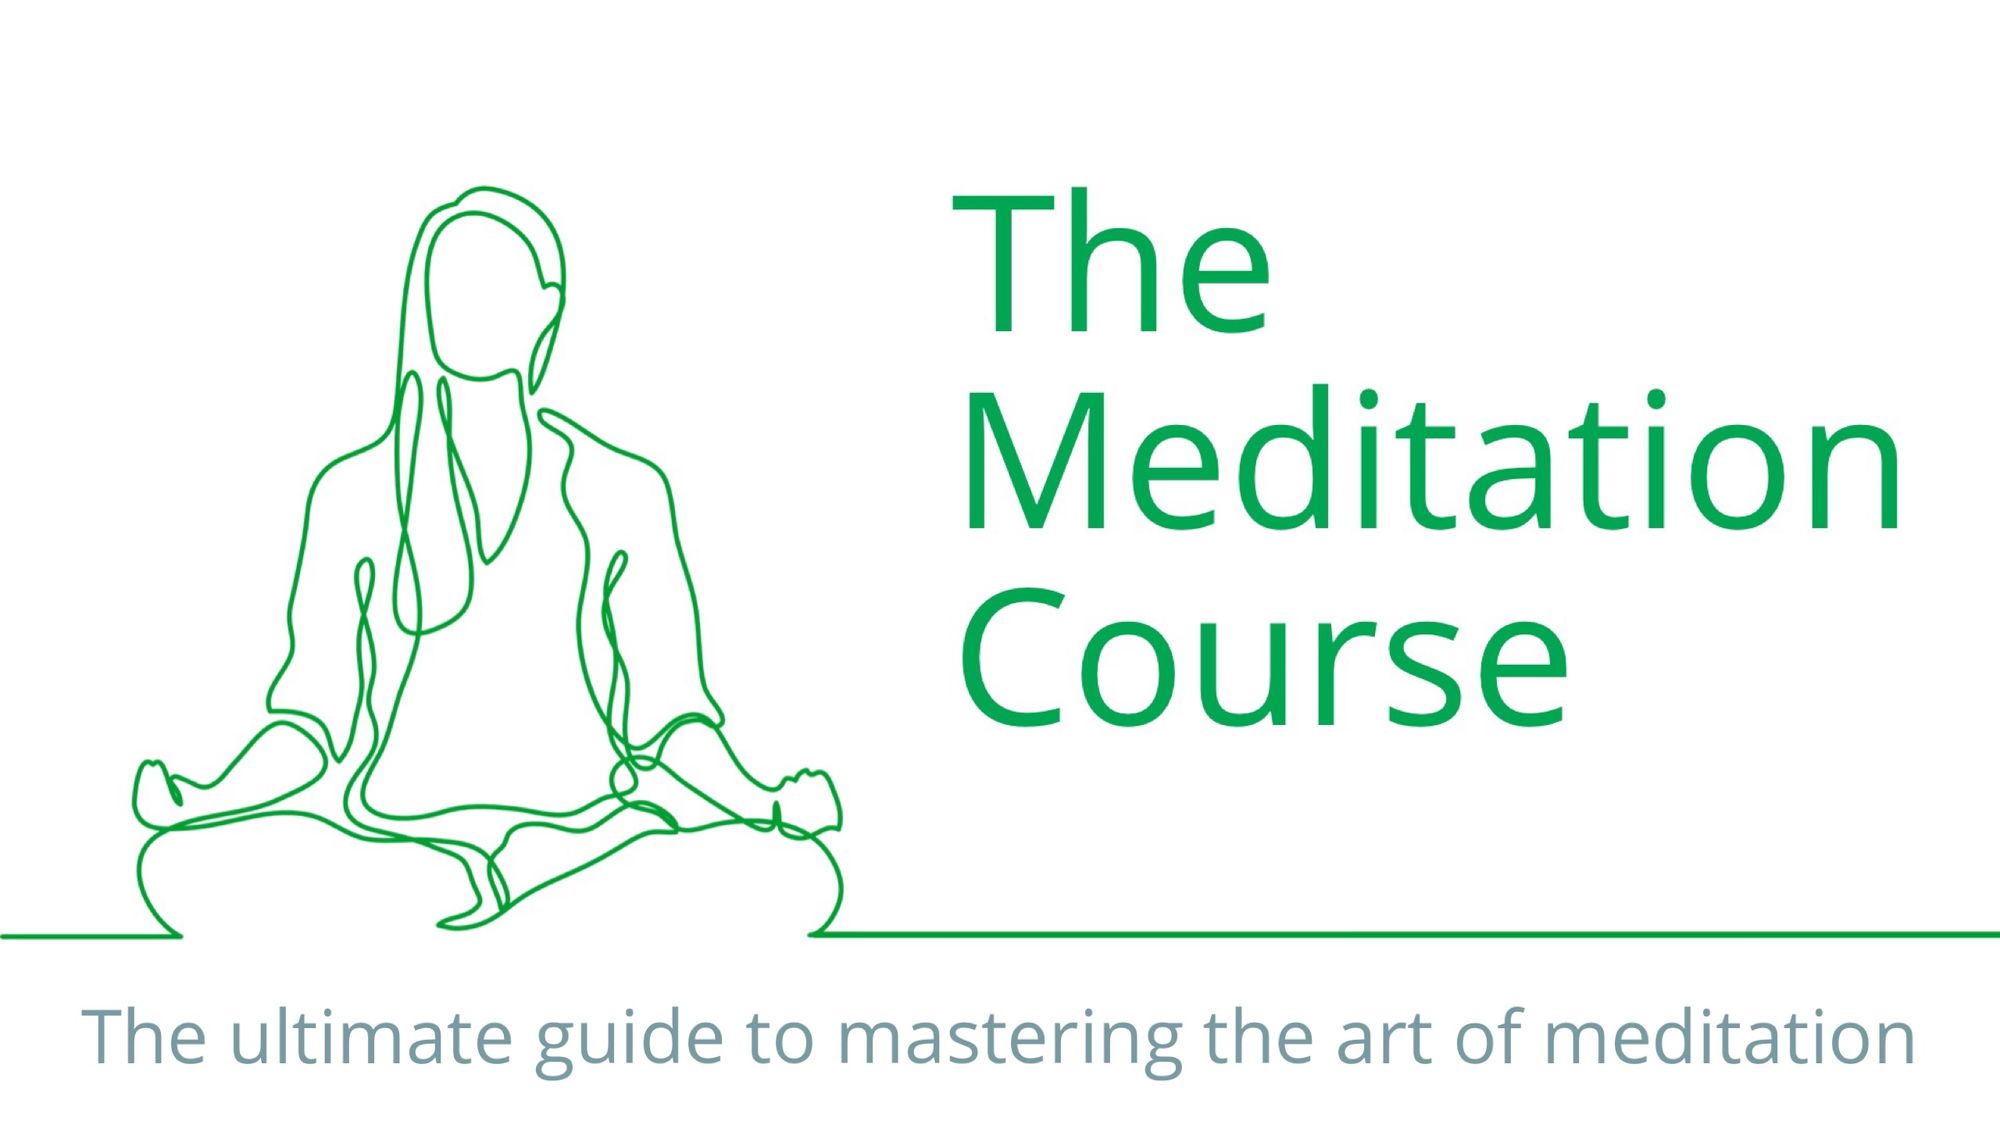 Start Here to Learn About The Meditation Course